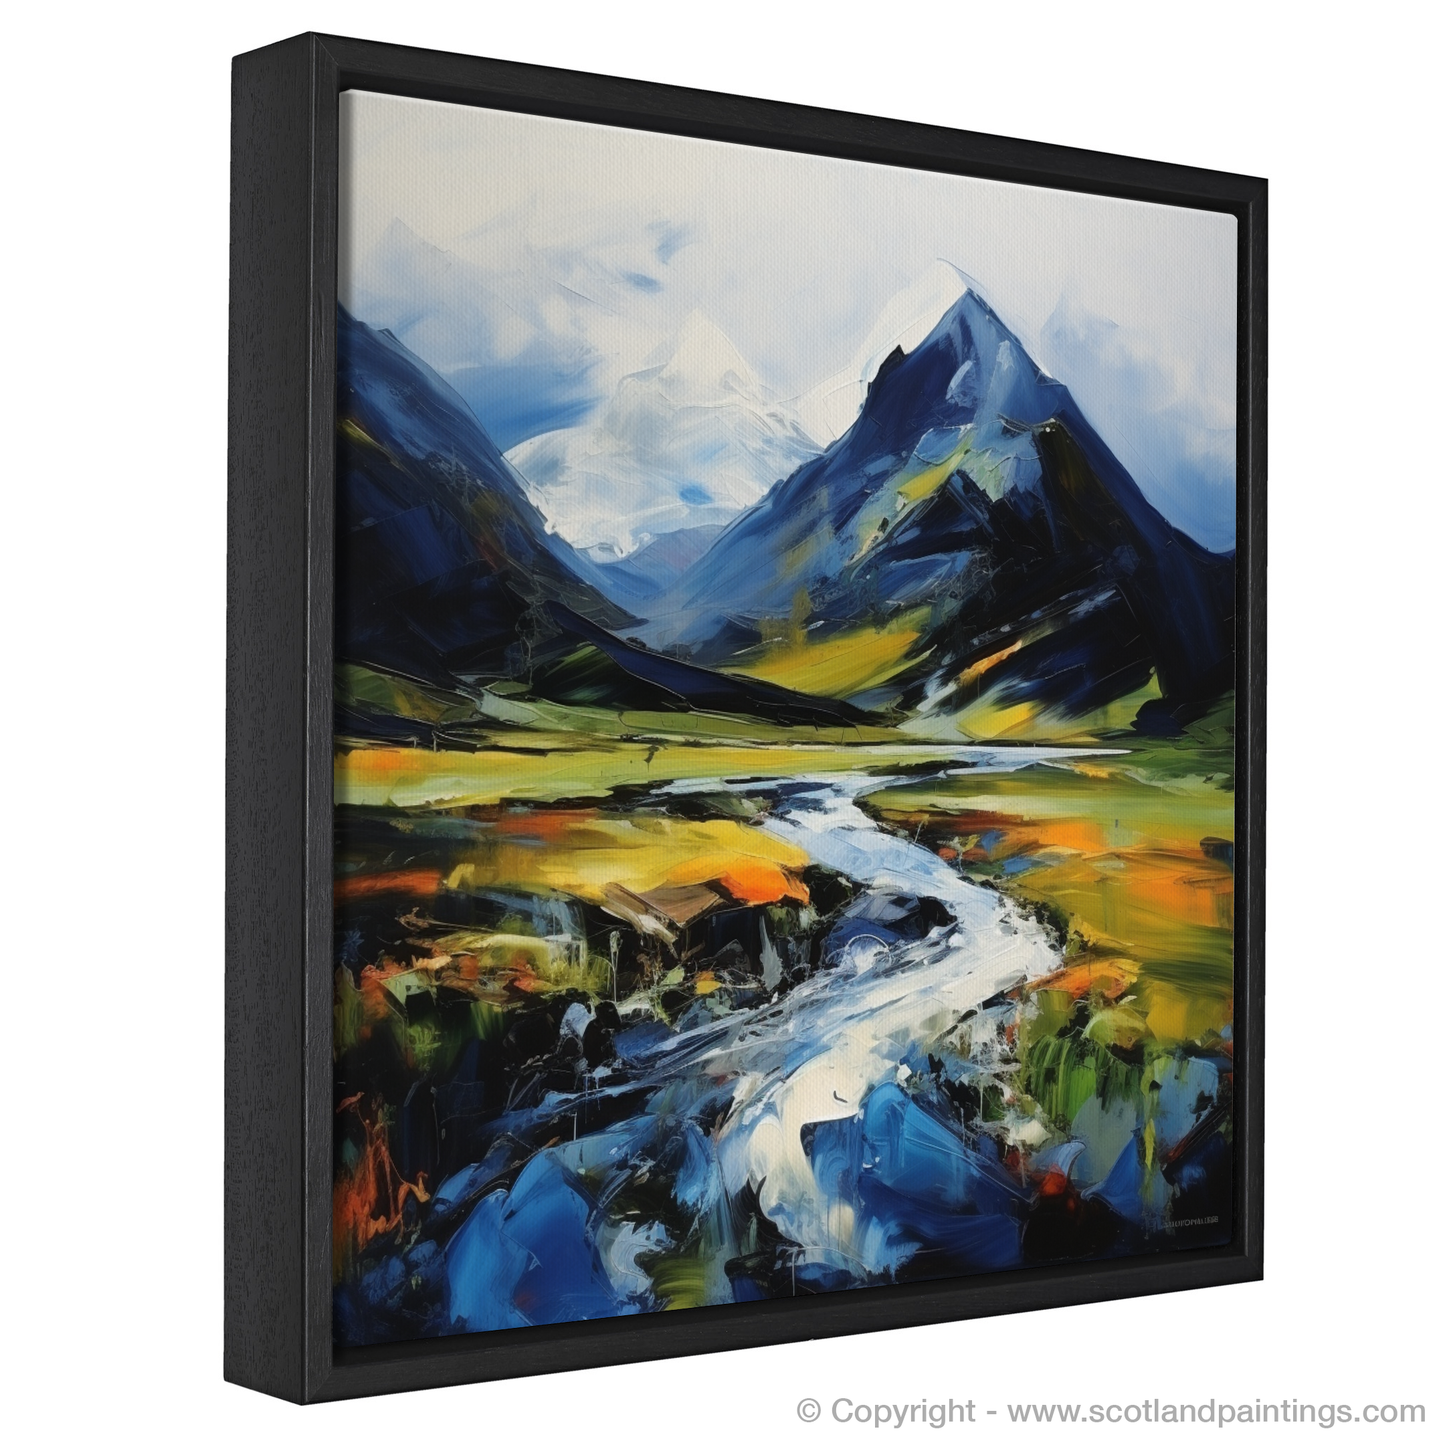 Painting and Art Print of Geal-chàrn (Drumochter) entitled "Highland Majesty: The Essence of Geal-chàrn".